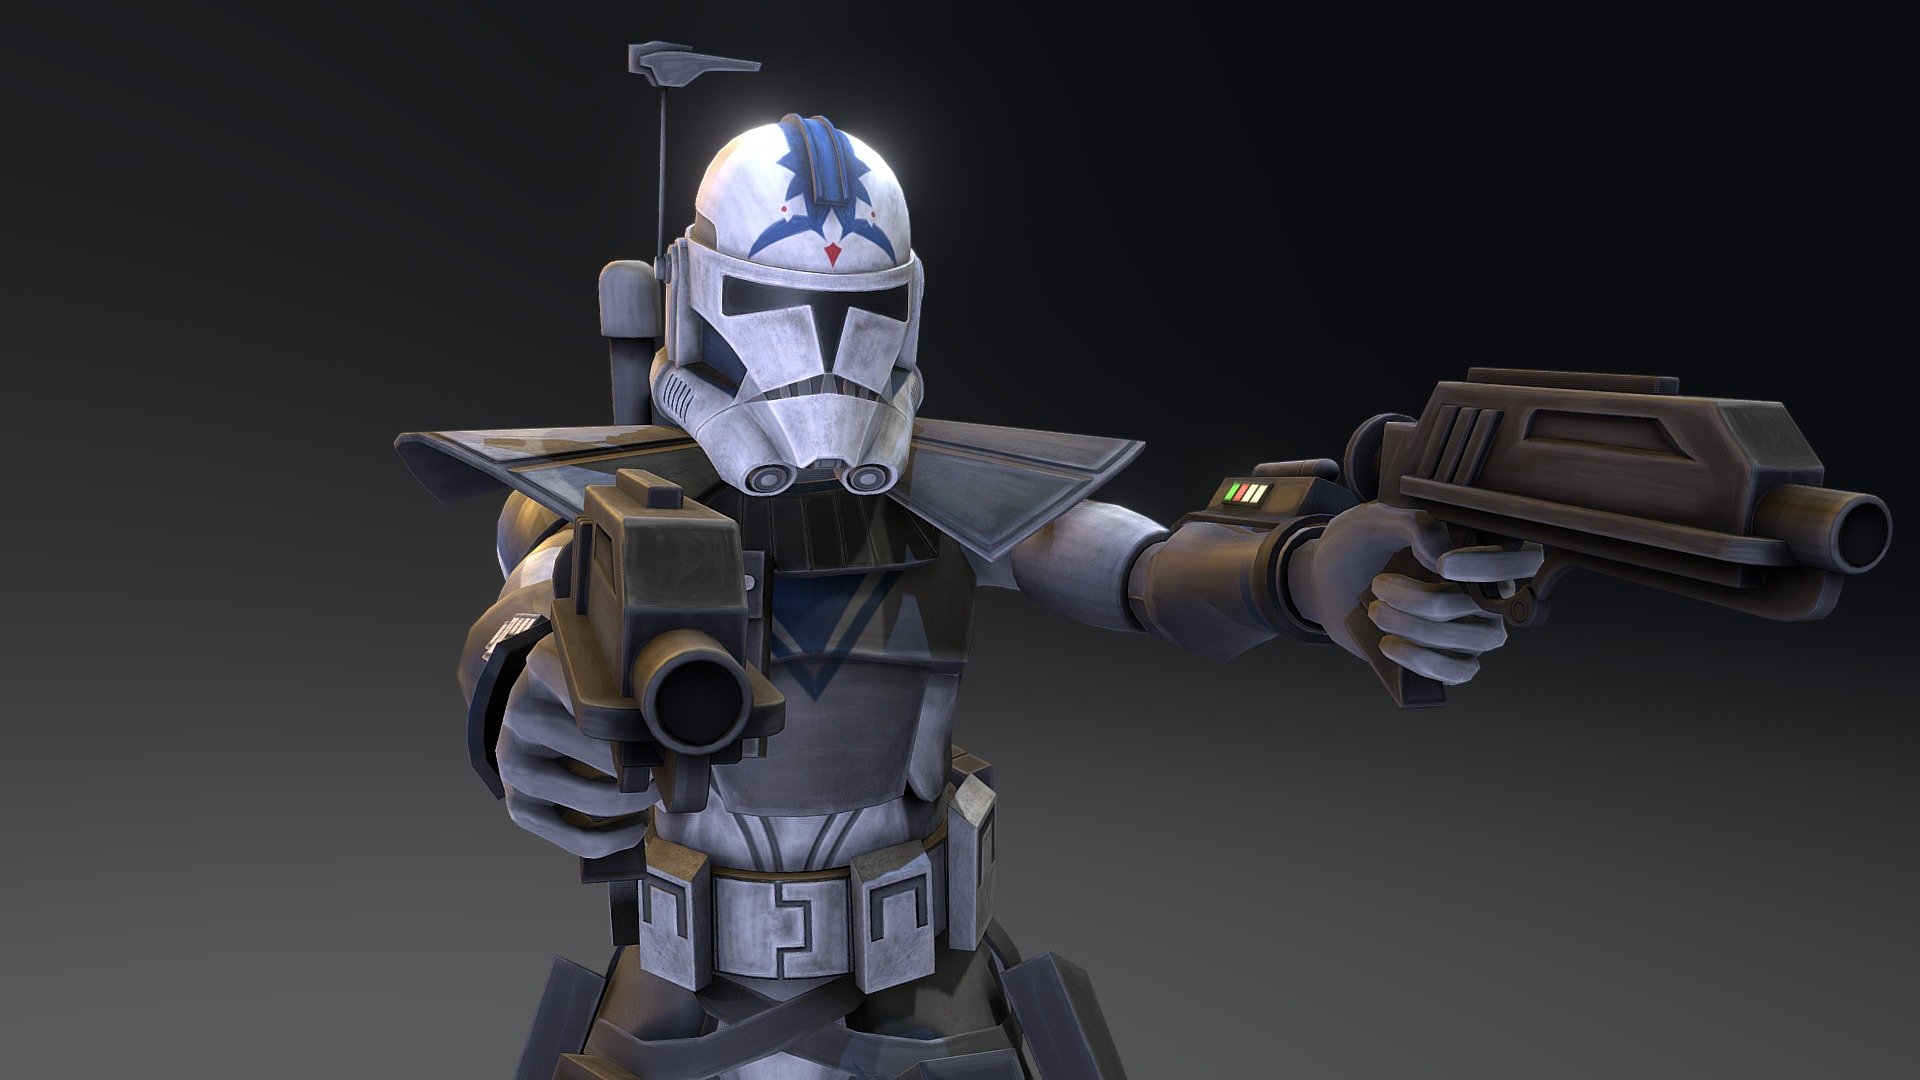 CT-5555 (short for CT-27-5555), and later referred to as ARC-5555, was an Advanced Recon Commando who served in the Grand Army of the Republic during the Clone Wars. Due to his clone designation, he was given the nickname &ldquo;Fives